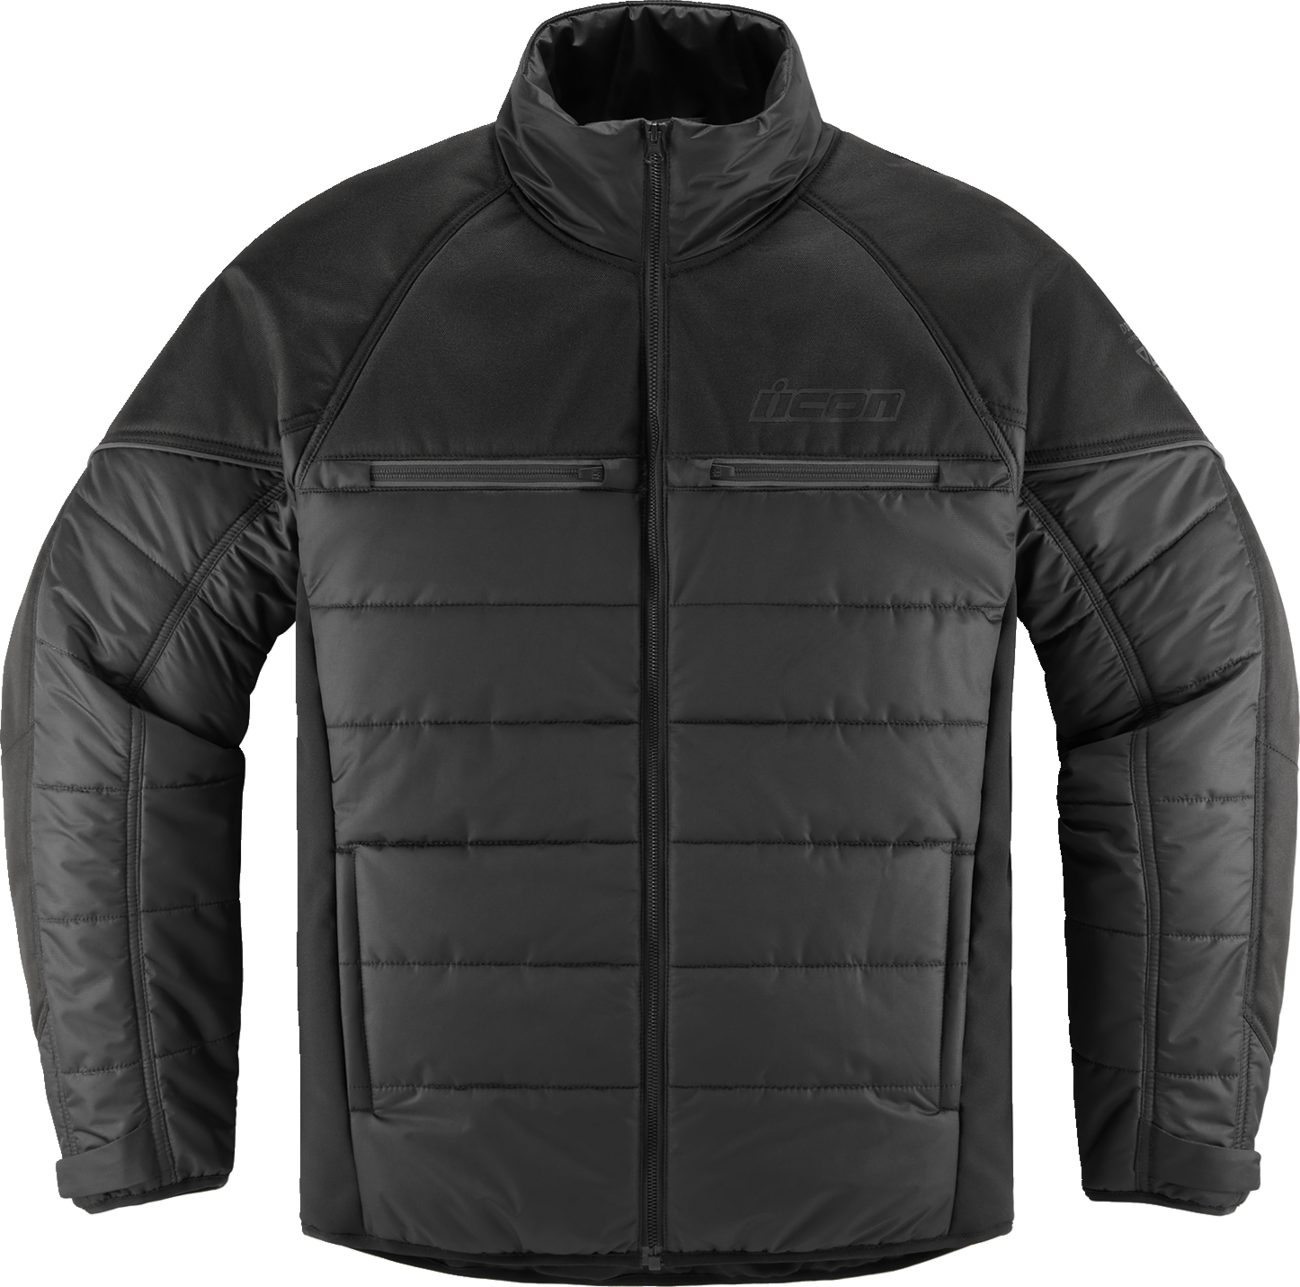 ICON Ghost Puffer Jacket - Black/Charcoal - 3XL 2820-6195